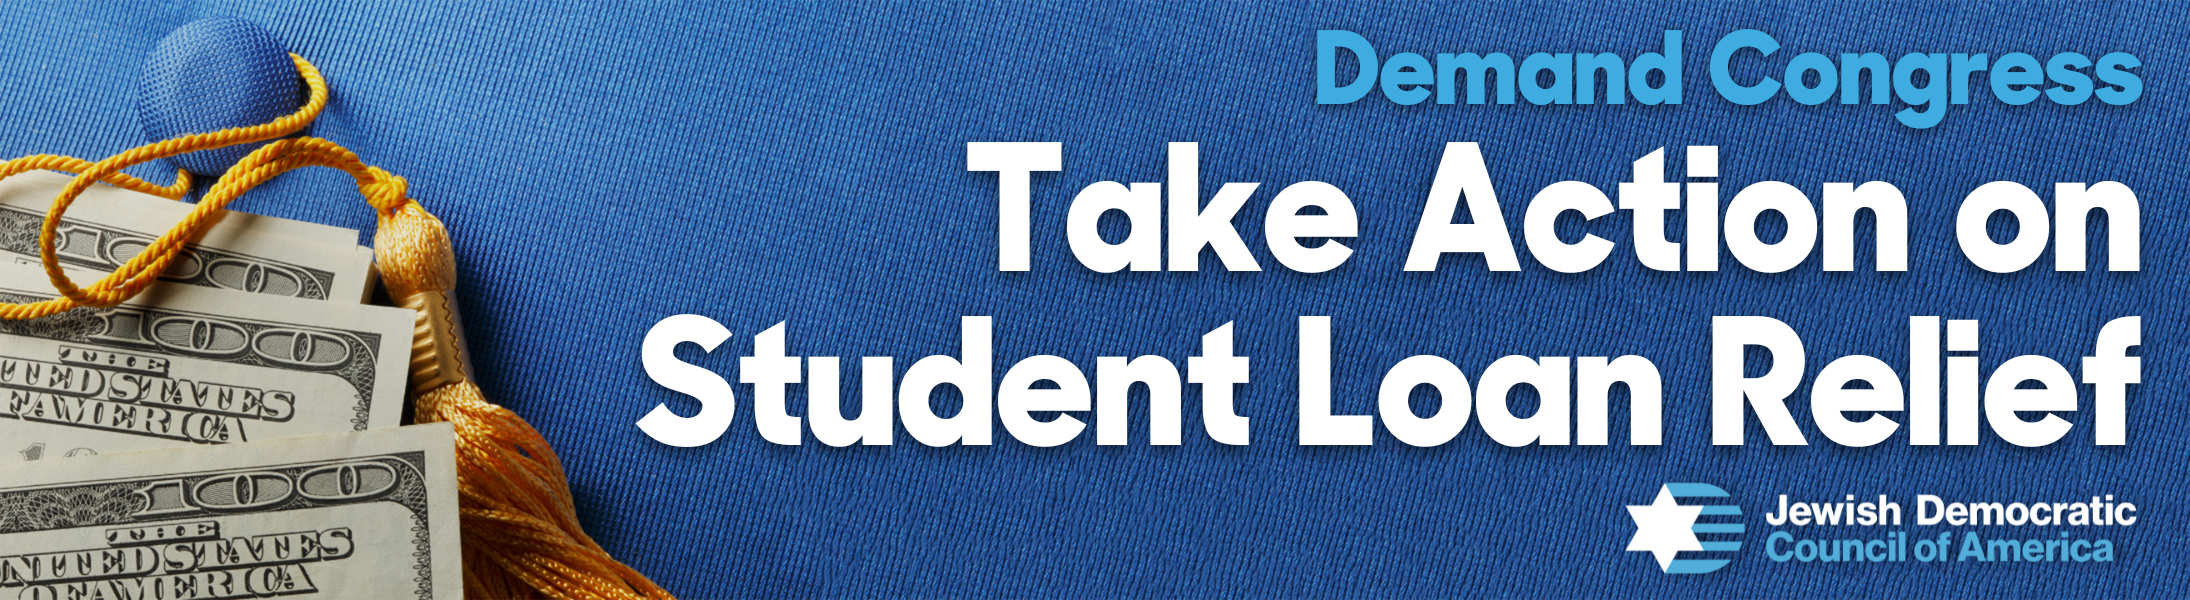 Demand Congress Take Action on Student Loan Relief